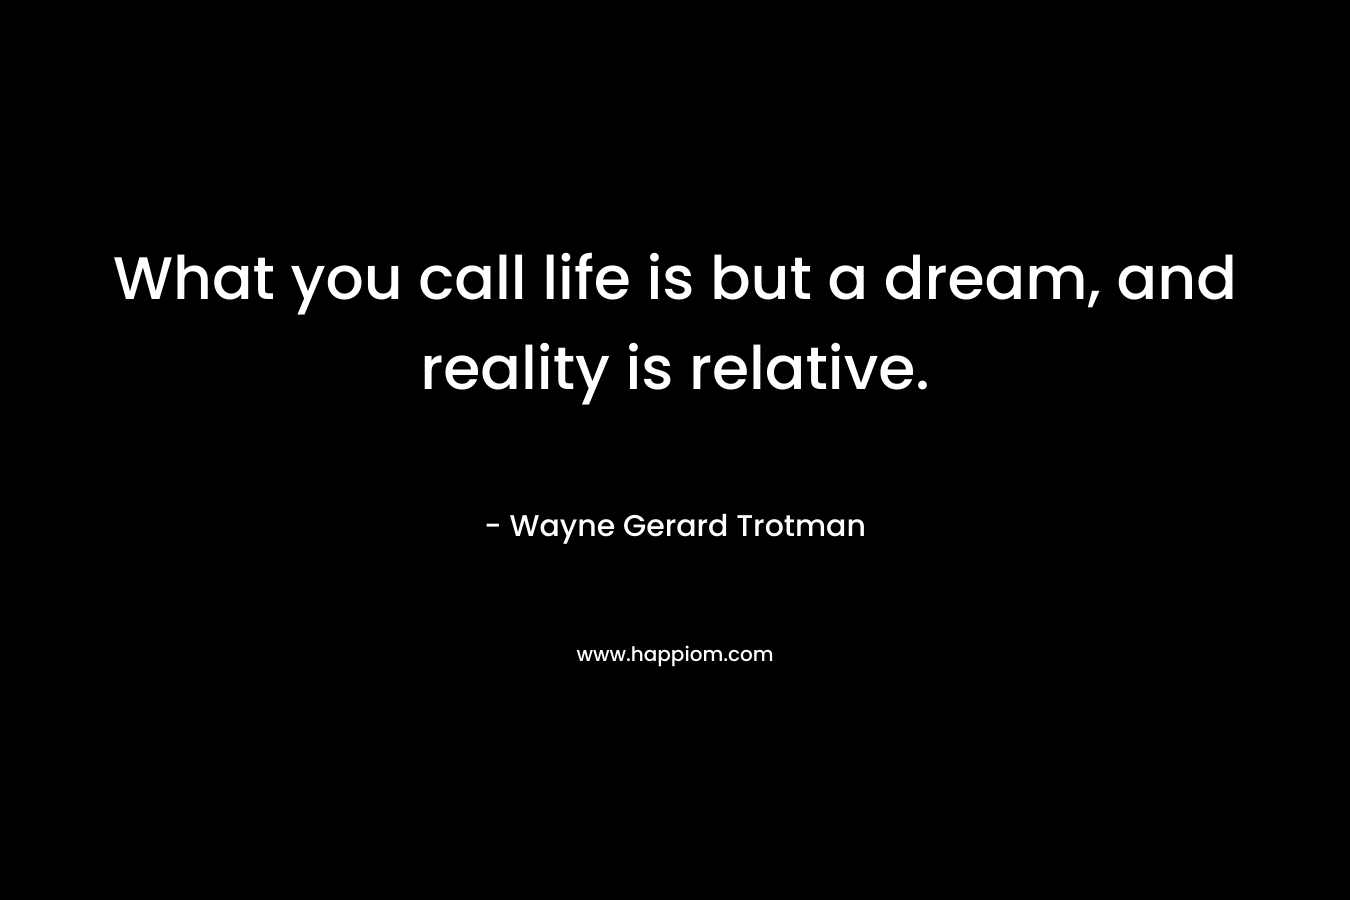 What you call life is but a dream, and reality is relative.